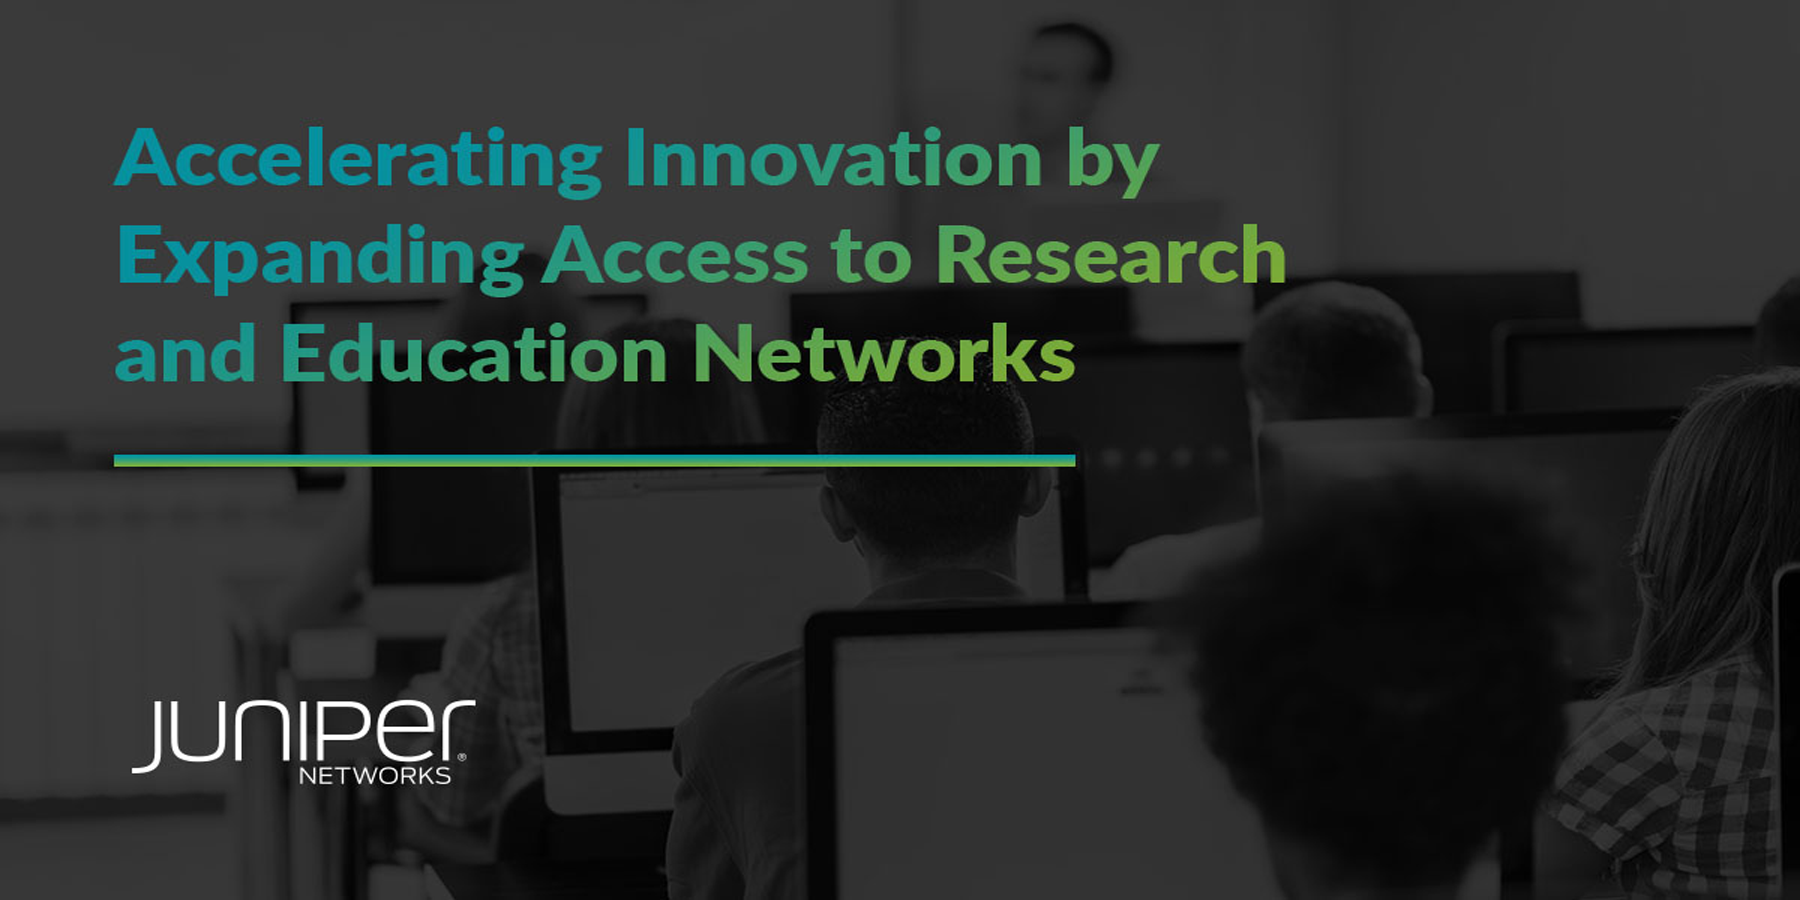 Accelerating Innovation by Expanding Access to Research and Education Networks